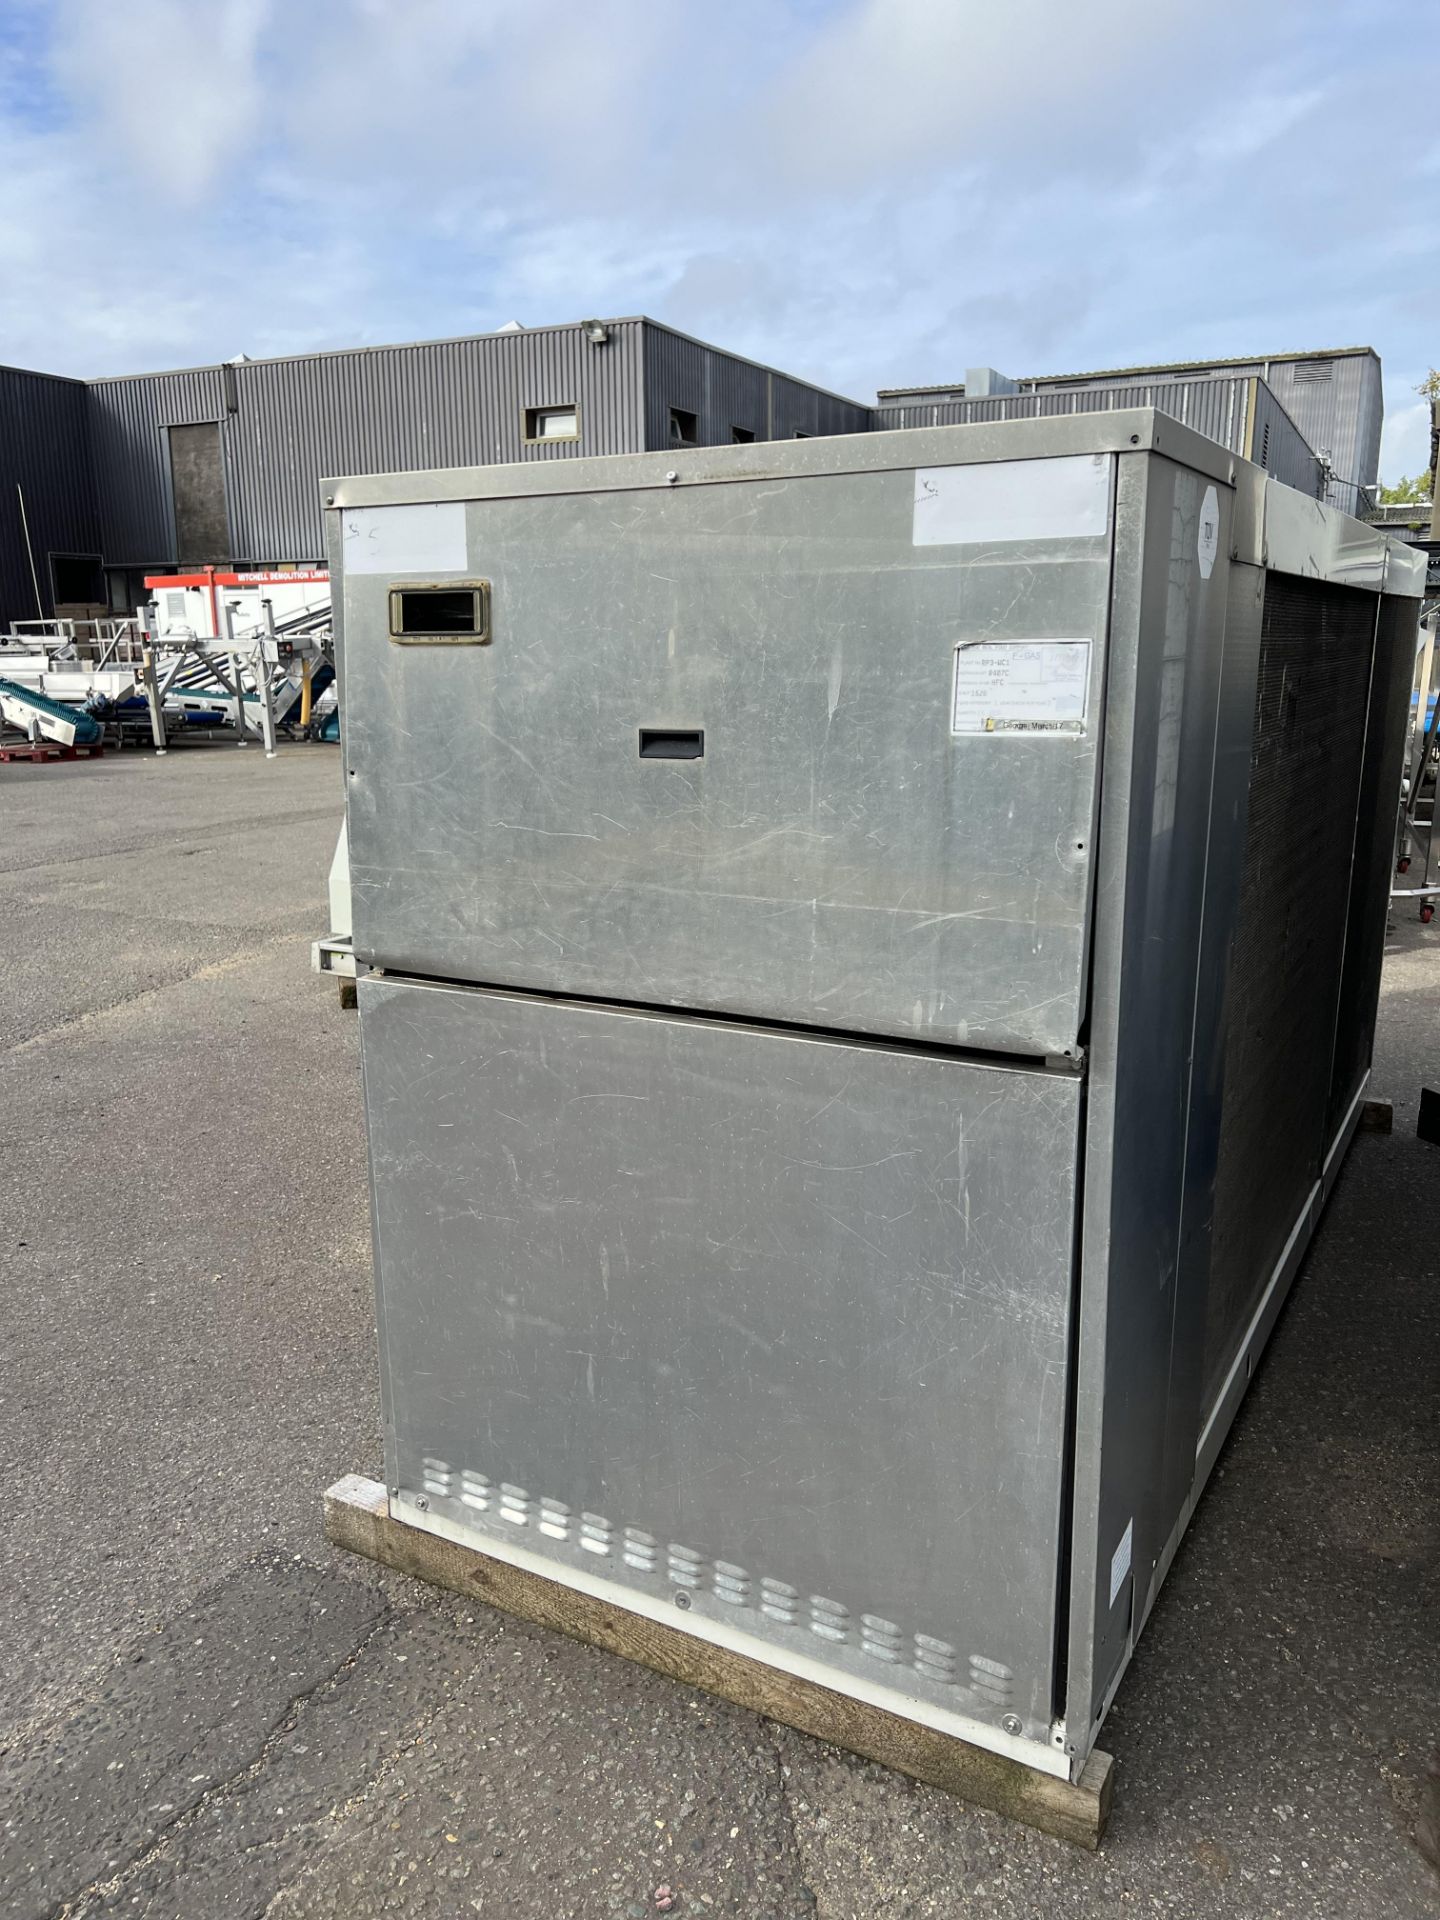 TUV ICS Climaventa NOS/L N O512 Ten Fan Water/ Glycol Cooler, approx. 3.4m x 1.1m x 1.6m high Please - Image 6 of 7